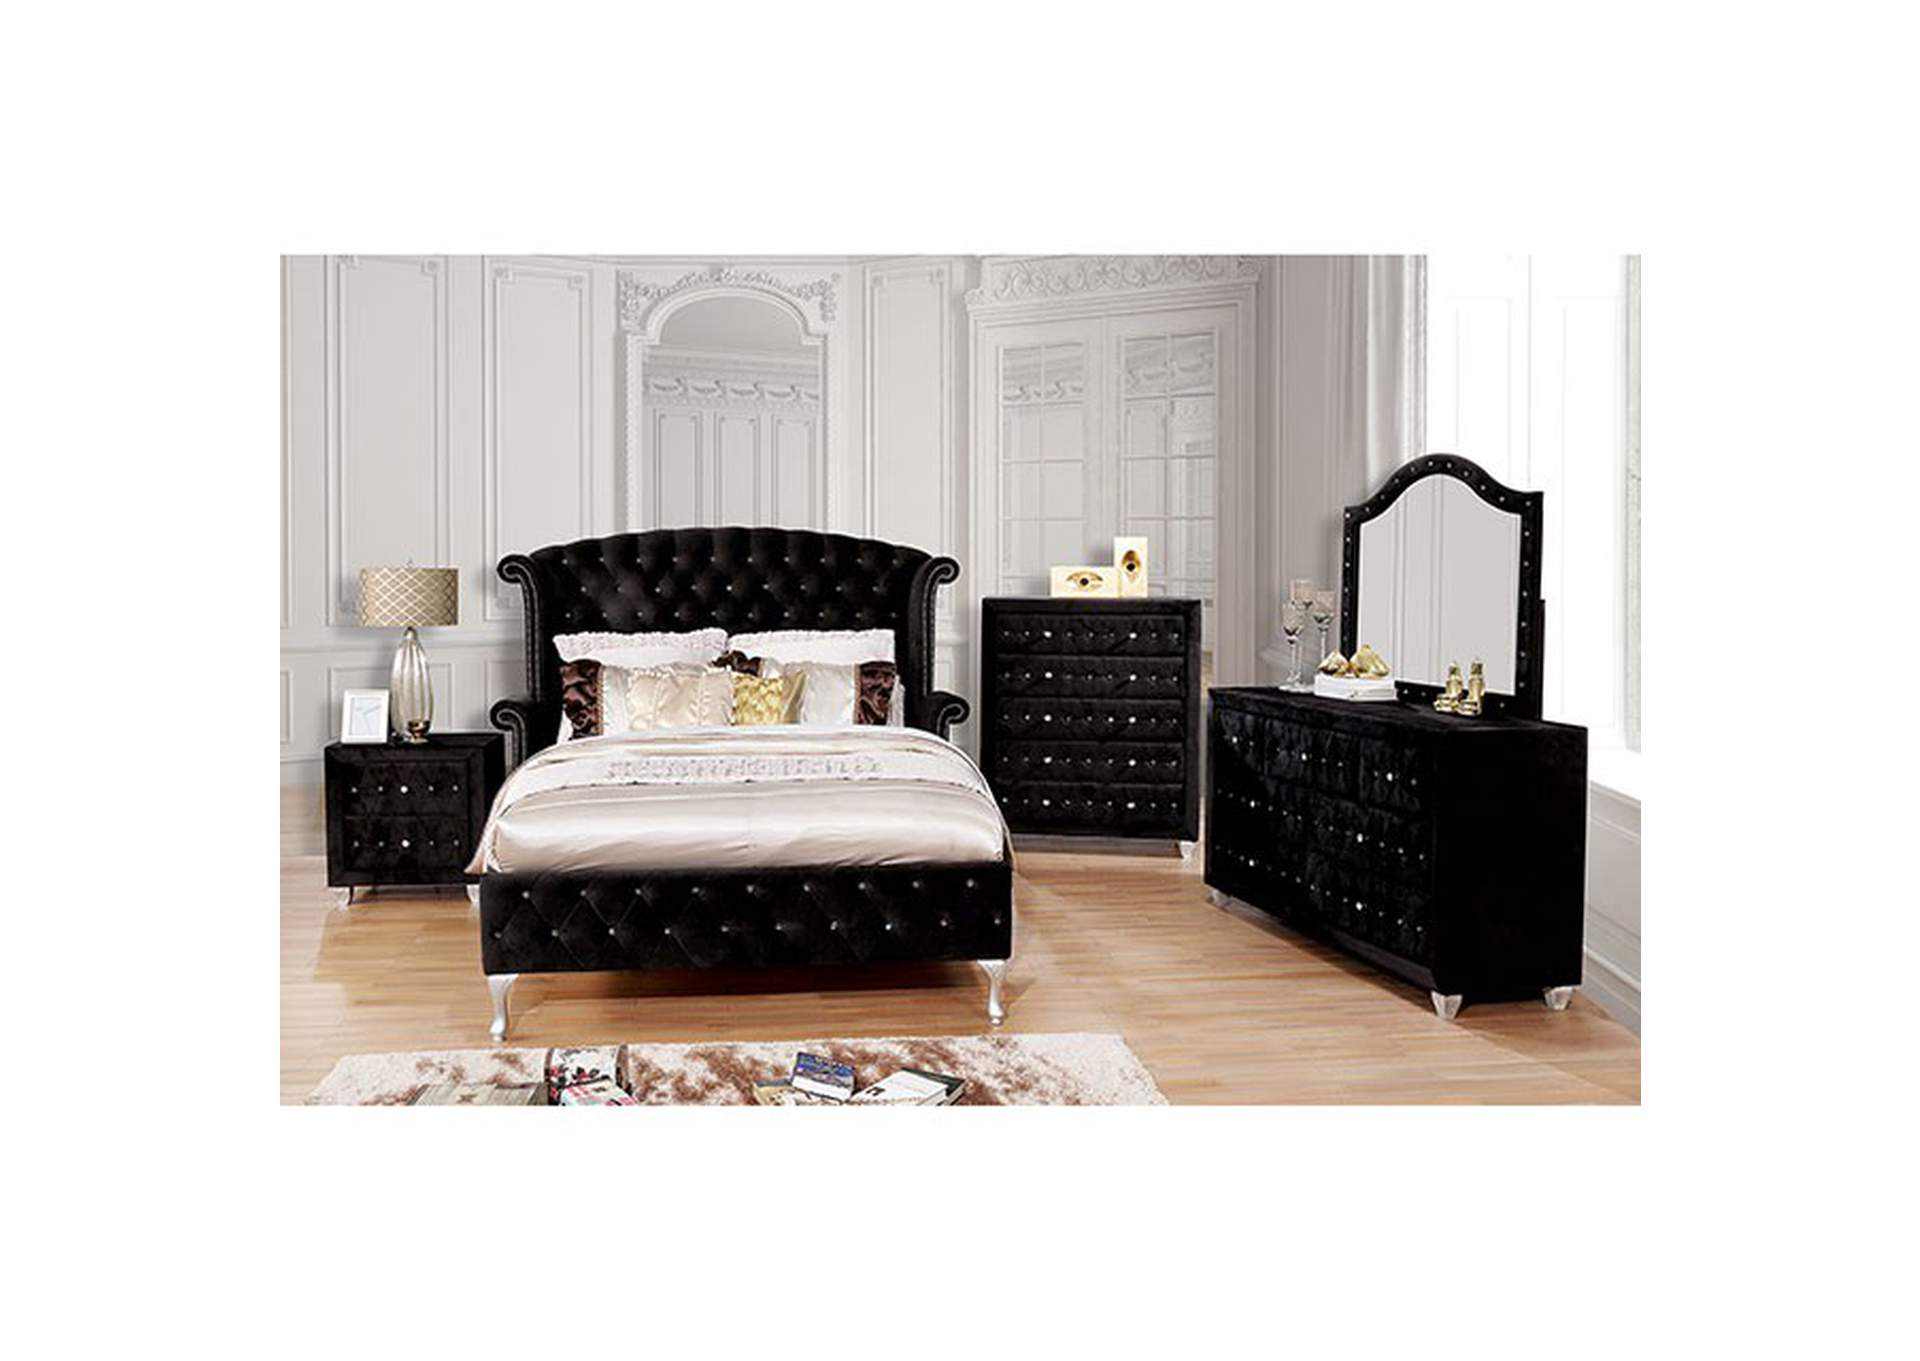 Alzire Queen Bed,Furniture of America